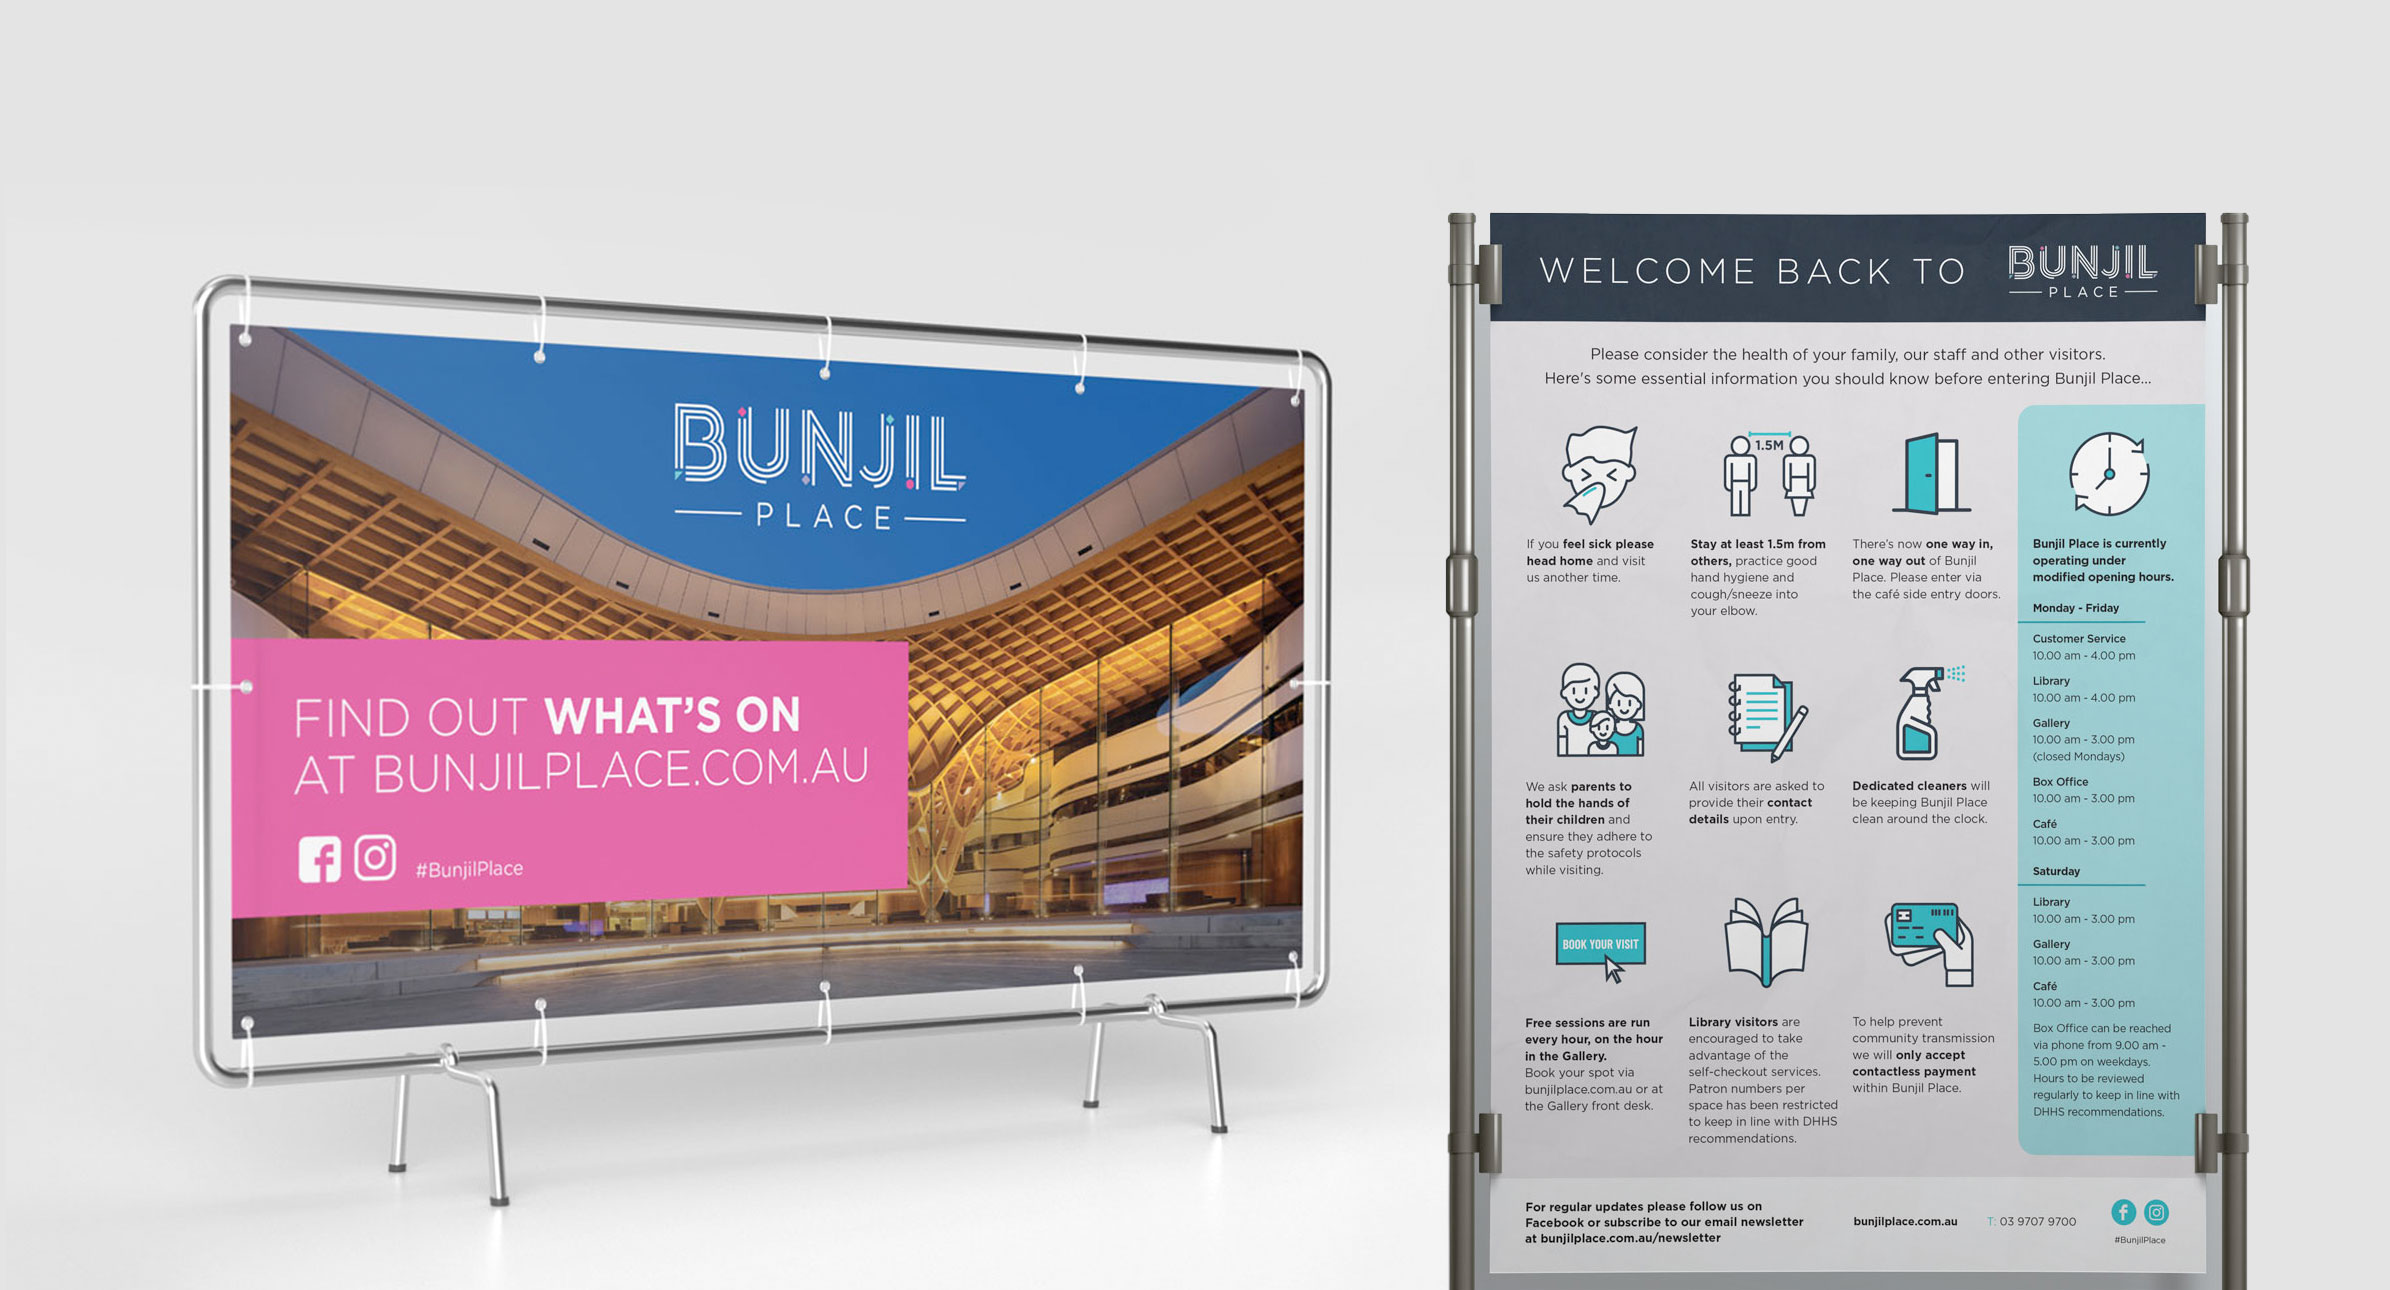 Zeemo are providing continuing professional services to Bunjil Place is in advertising